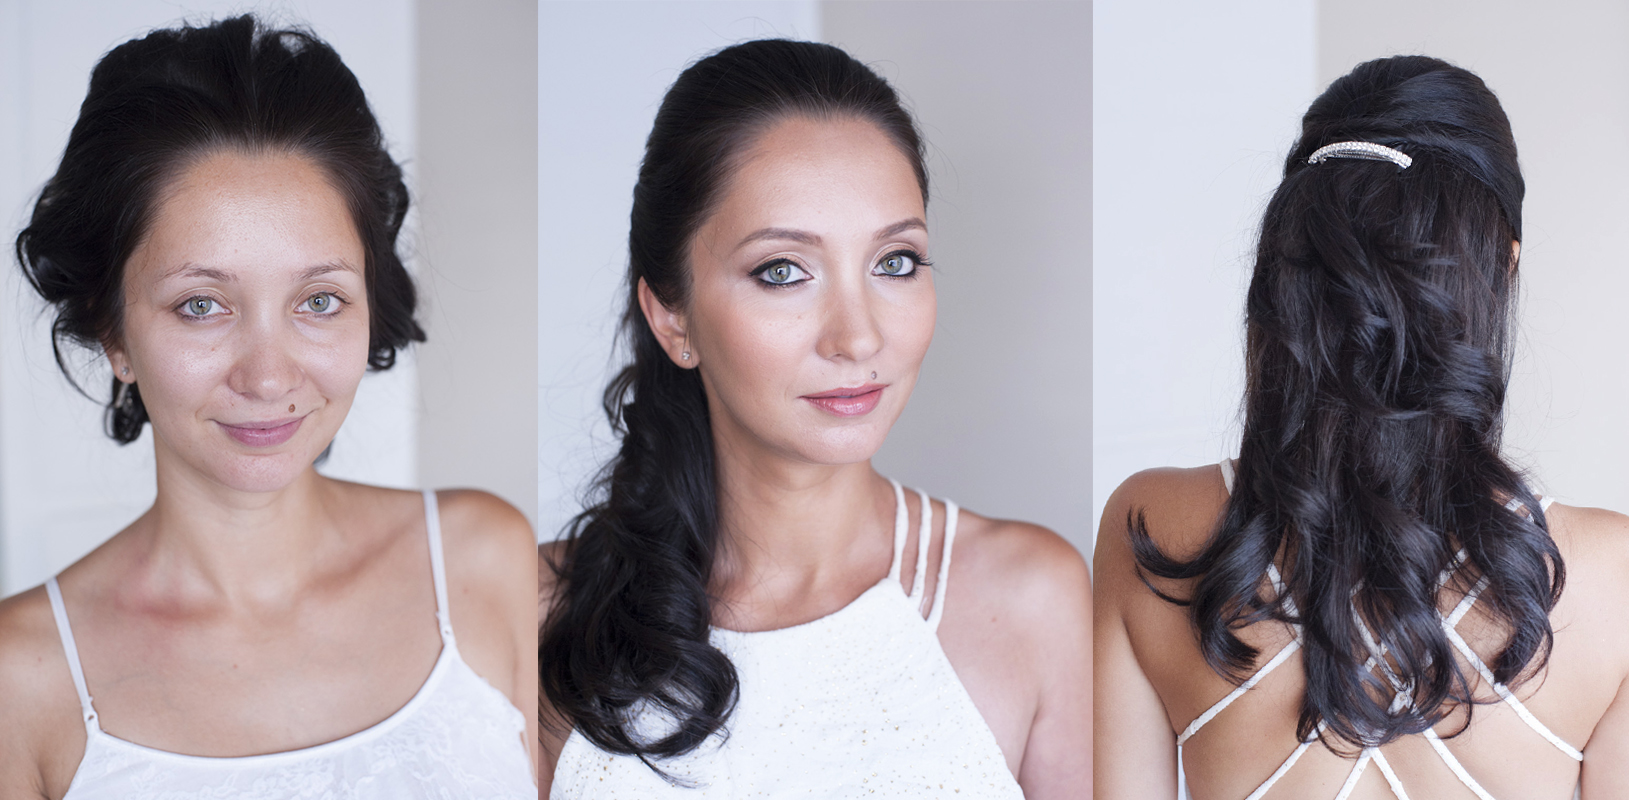 BeautyAffair before and after bridal makeup green eyes hairstyle half up down by Agne.jpg